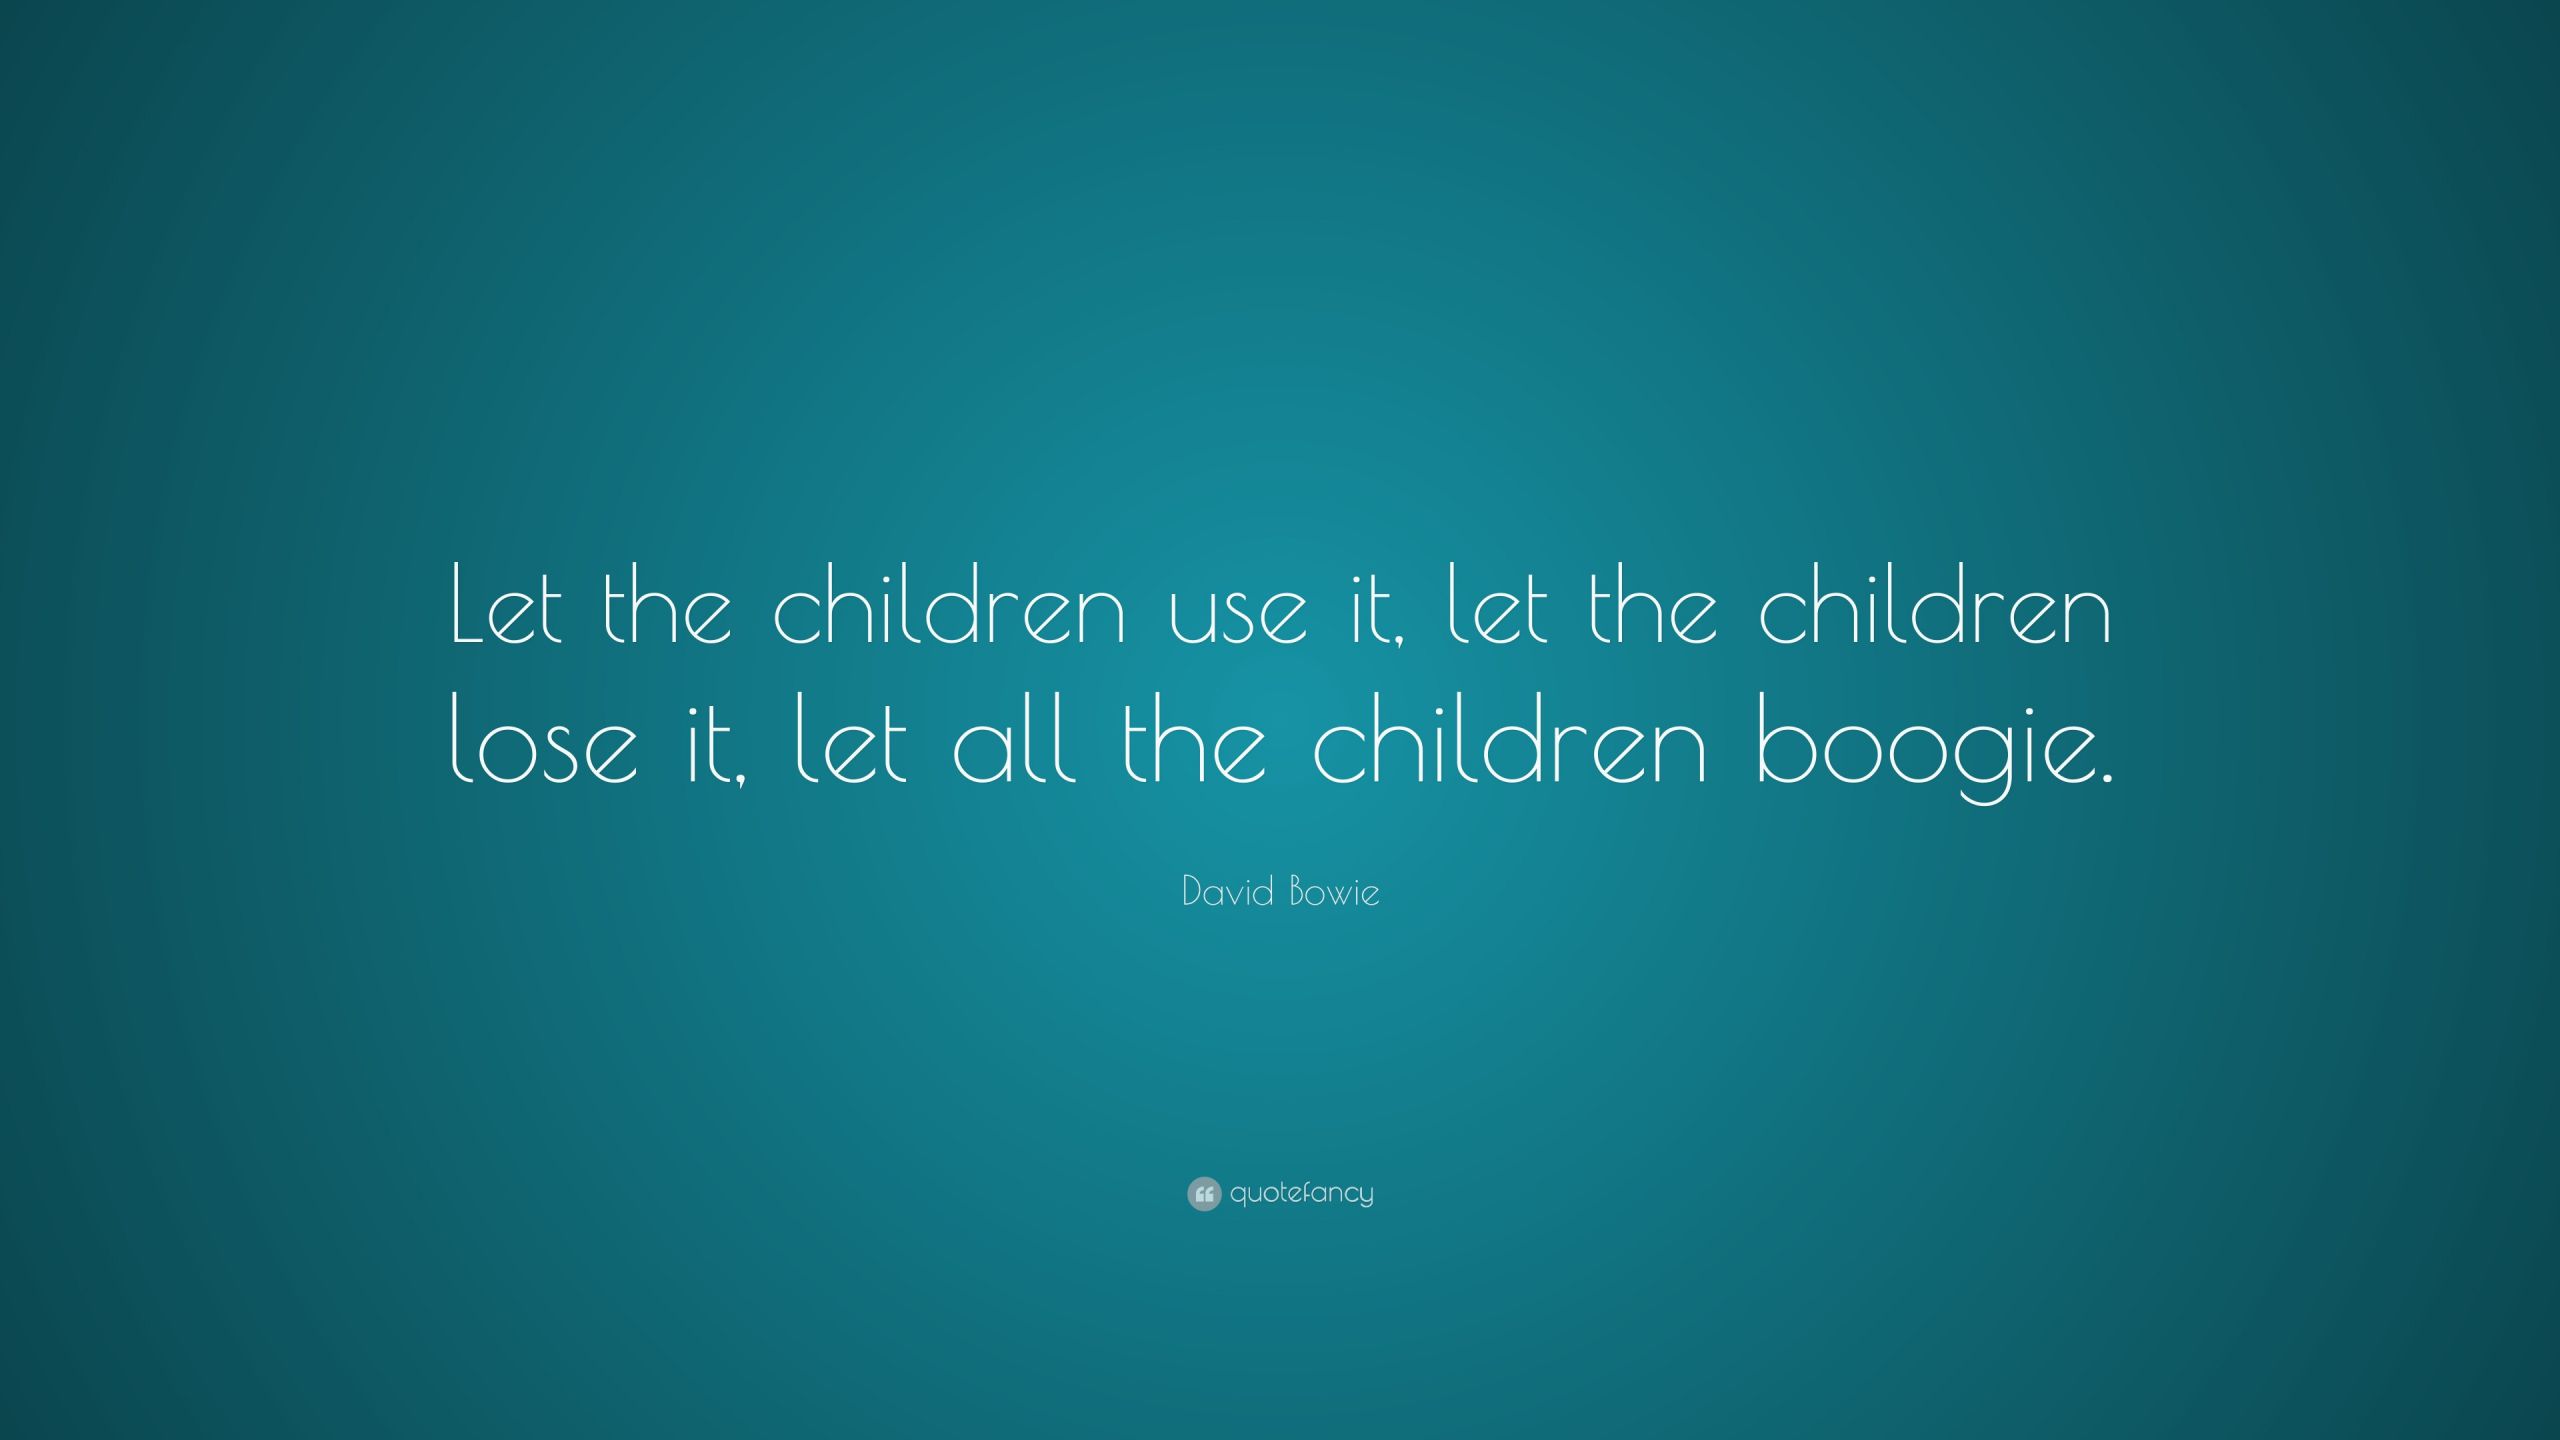 Let Kids Be Kids Quotes
 David Bowie Quotes 100 wallpapers Quotefancy